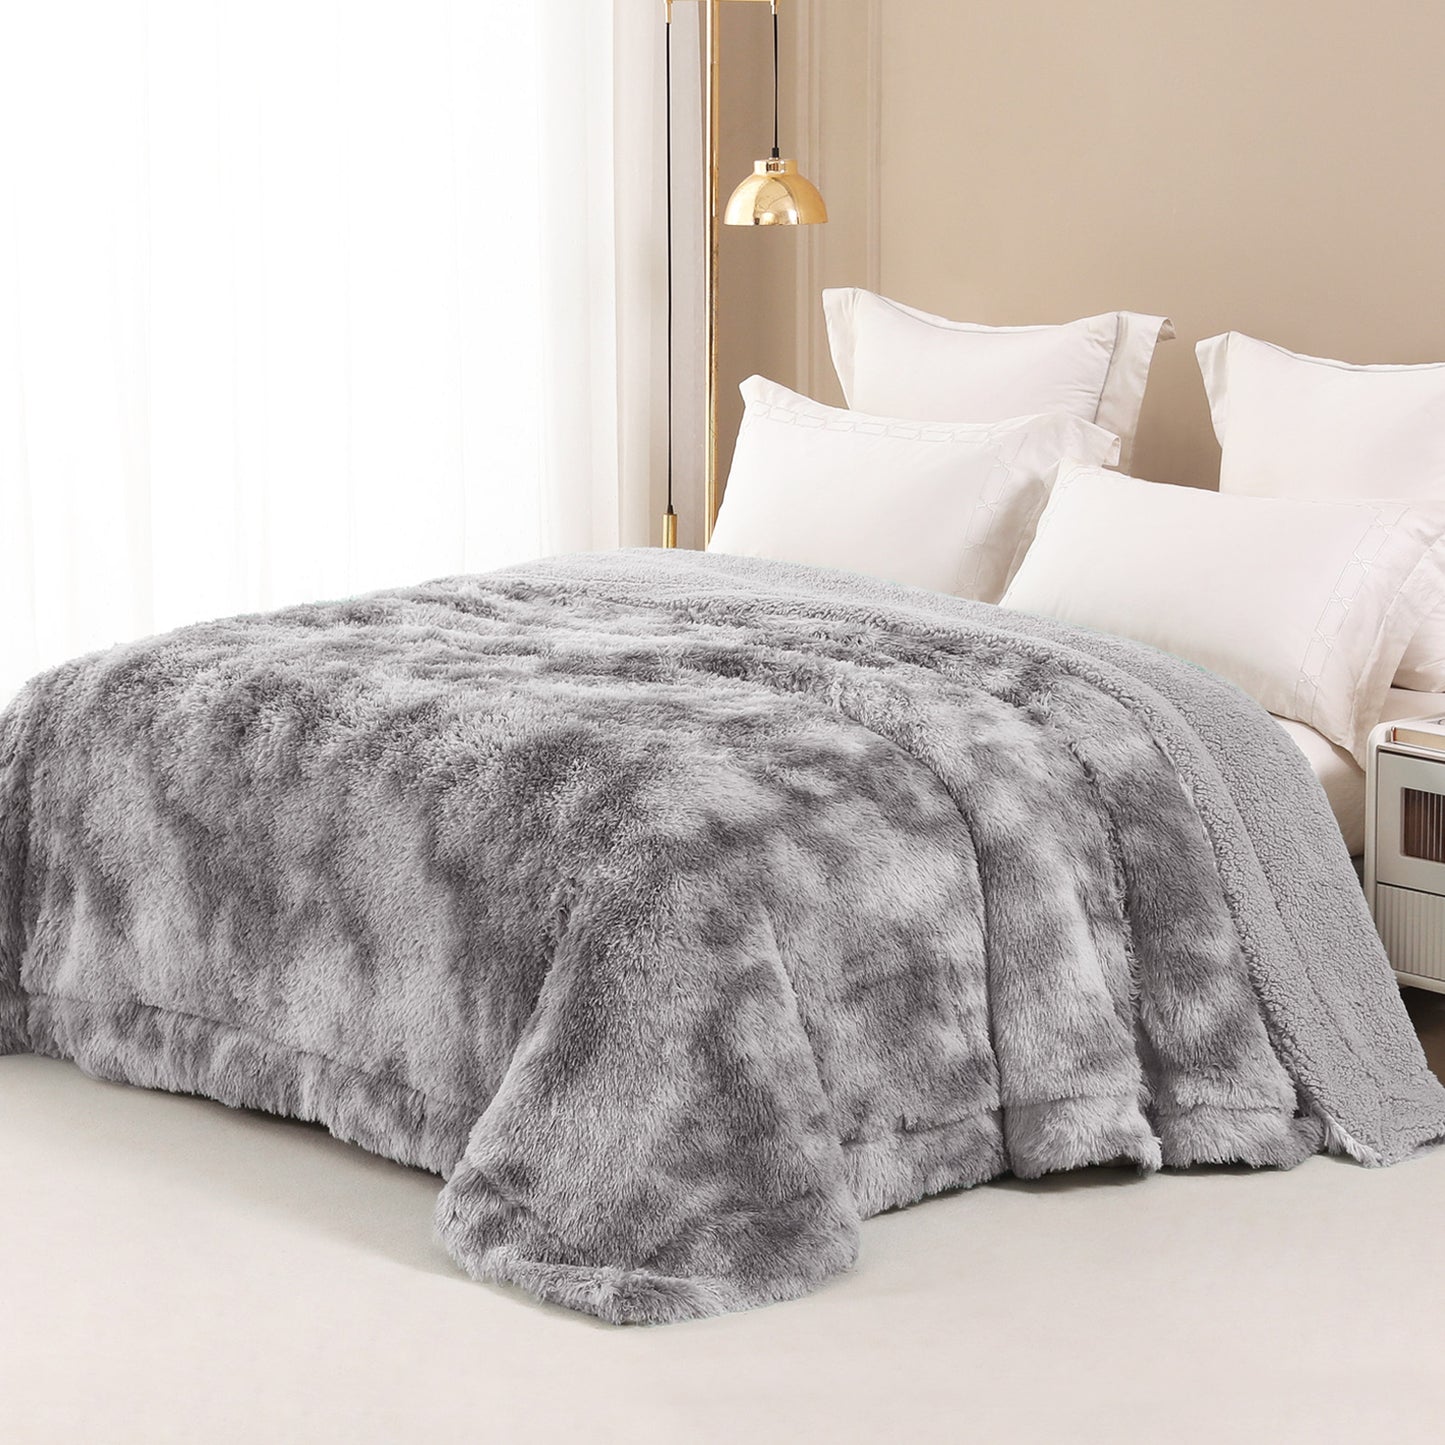 Exclusivo Mezcla Twin Size Faux Fur Bed Blanket, Super Soft Fuzzy and Plush Reversible Sherpa Fleece Blanket and Warm Blankets for Bed, Sofa, Travel, 60X80 inches, Dark Grey